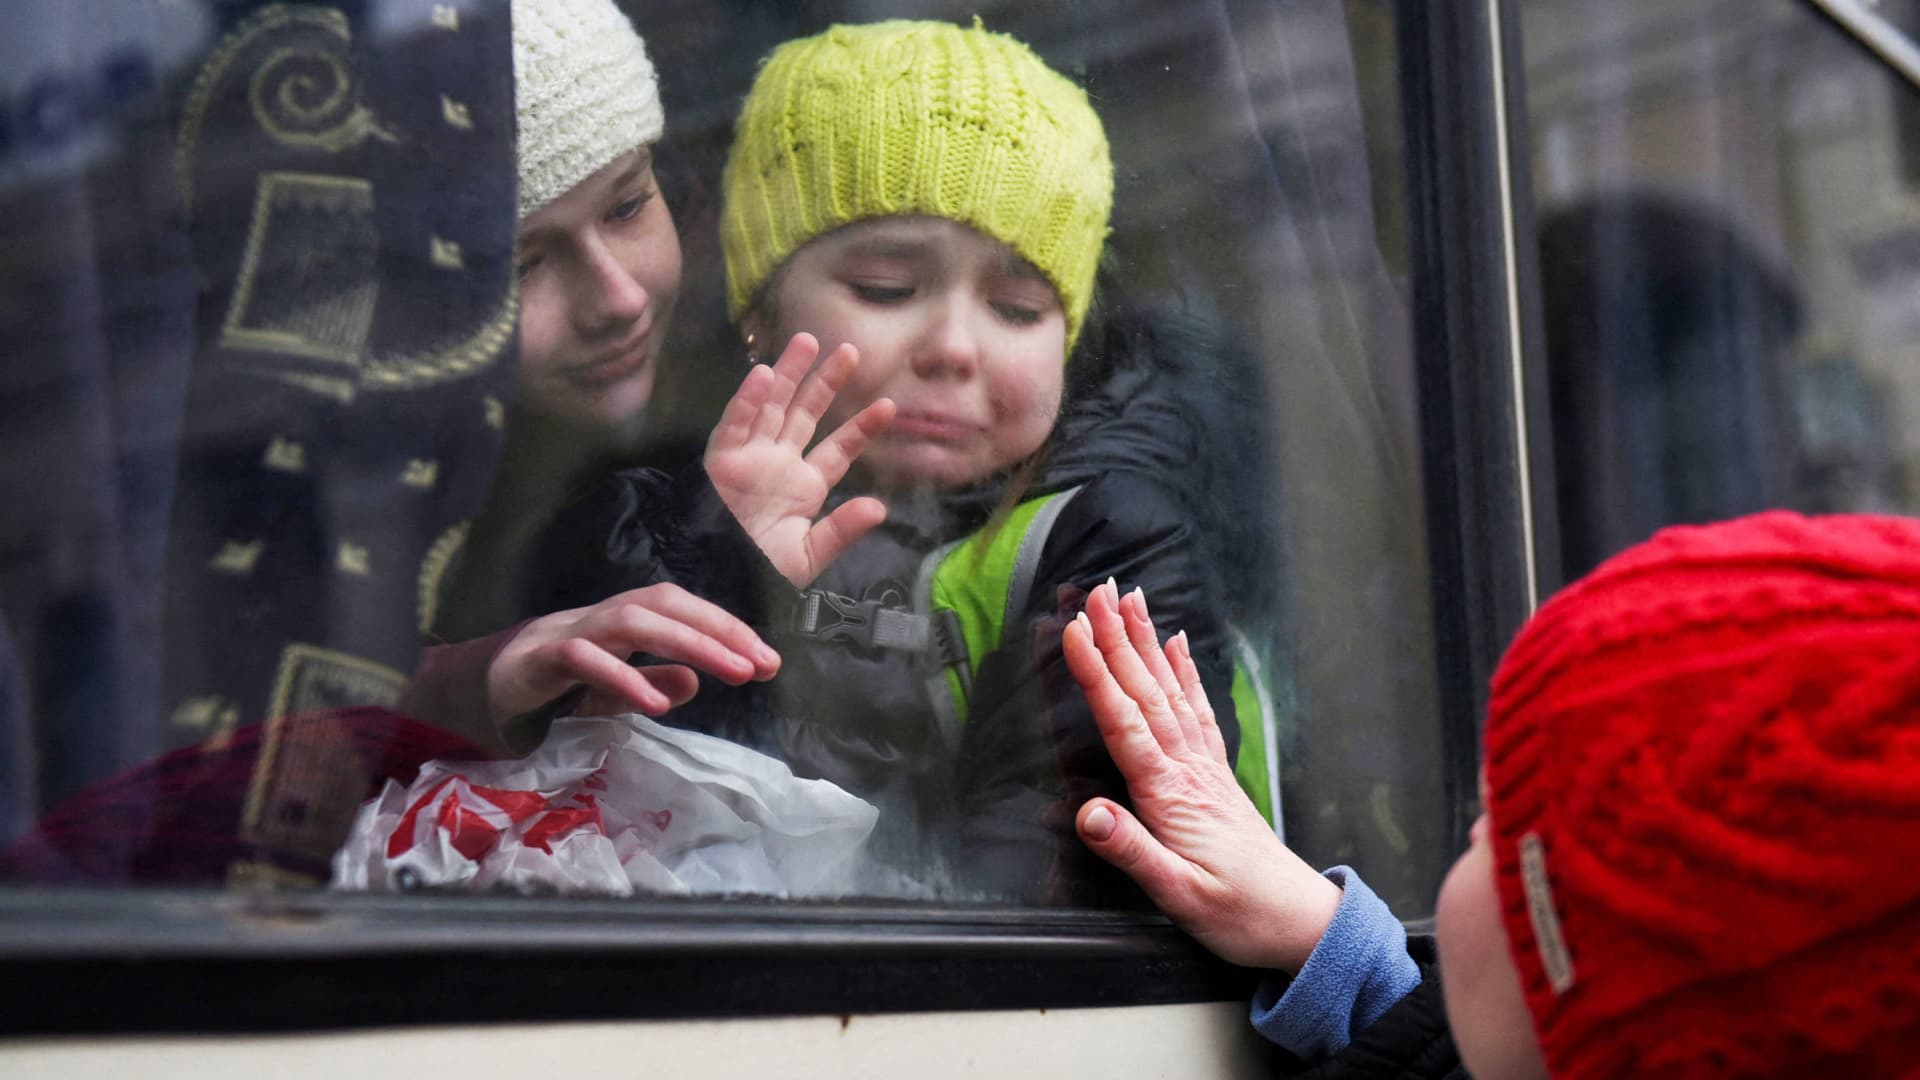 Alexandra, 12, holds her sister Esyea, 6, who cries as she waves at her mother, Irina, while members of the Jewish community of Odesa board a bus to flee Russia's invasion of Ukraine, in Odesa, Ukraine, March 7, 2022.